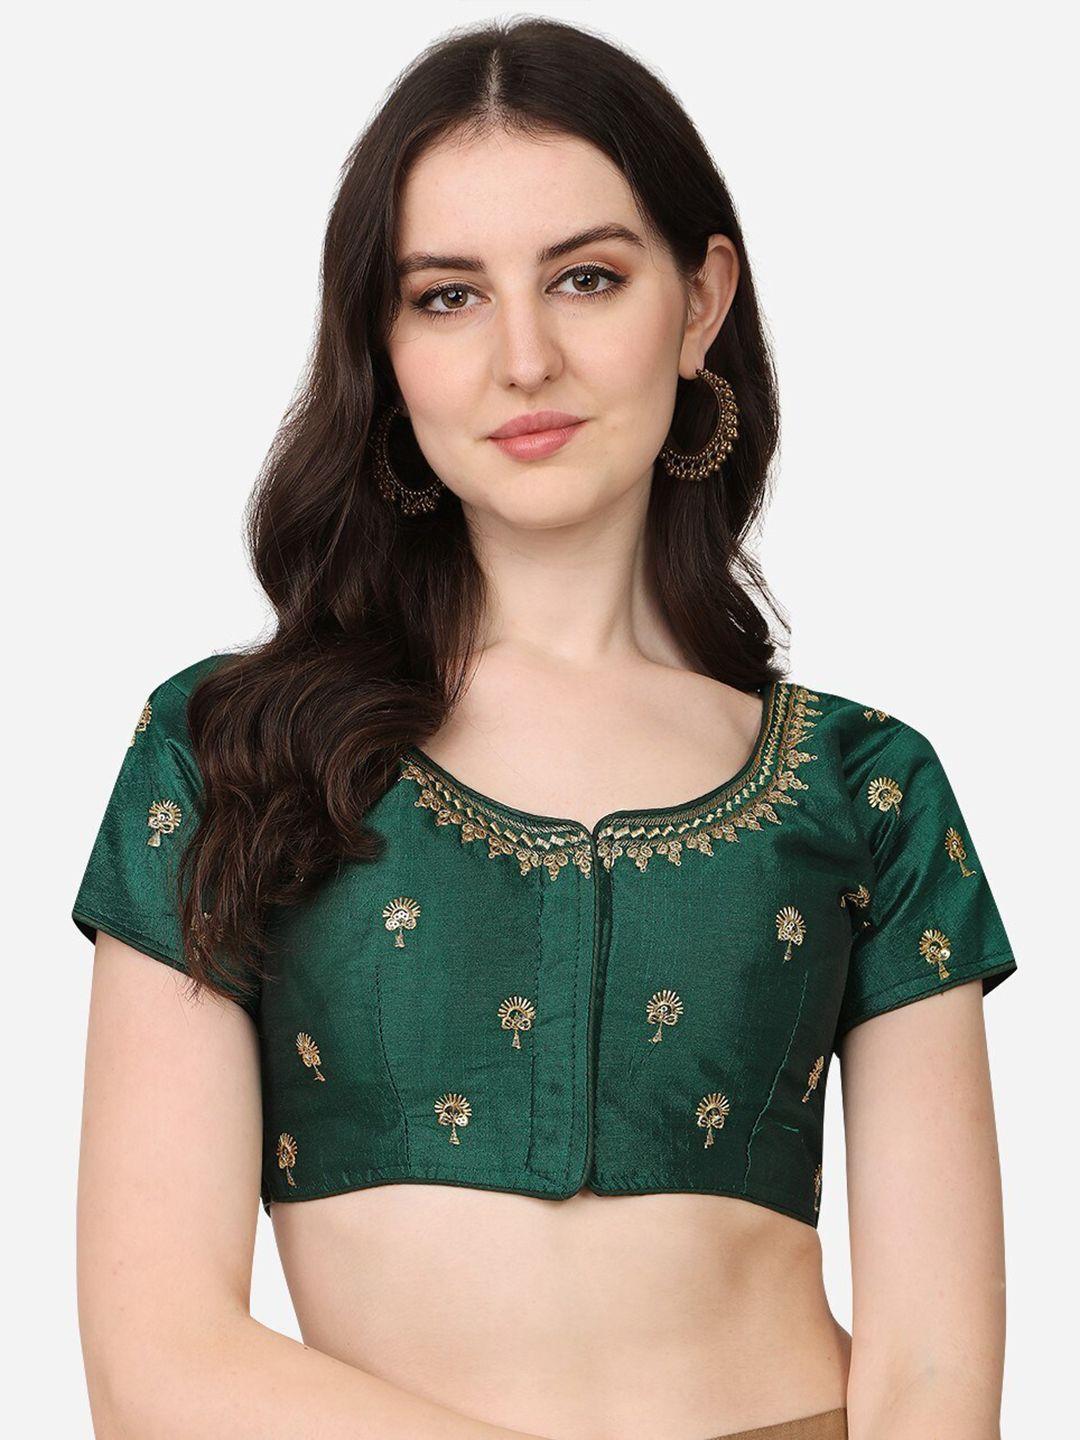 pujia mills green embroidered saree blouse